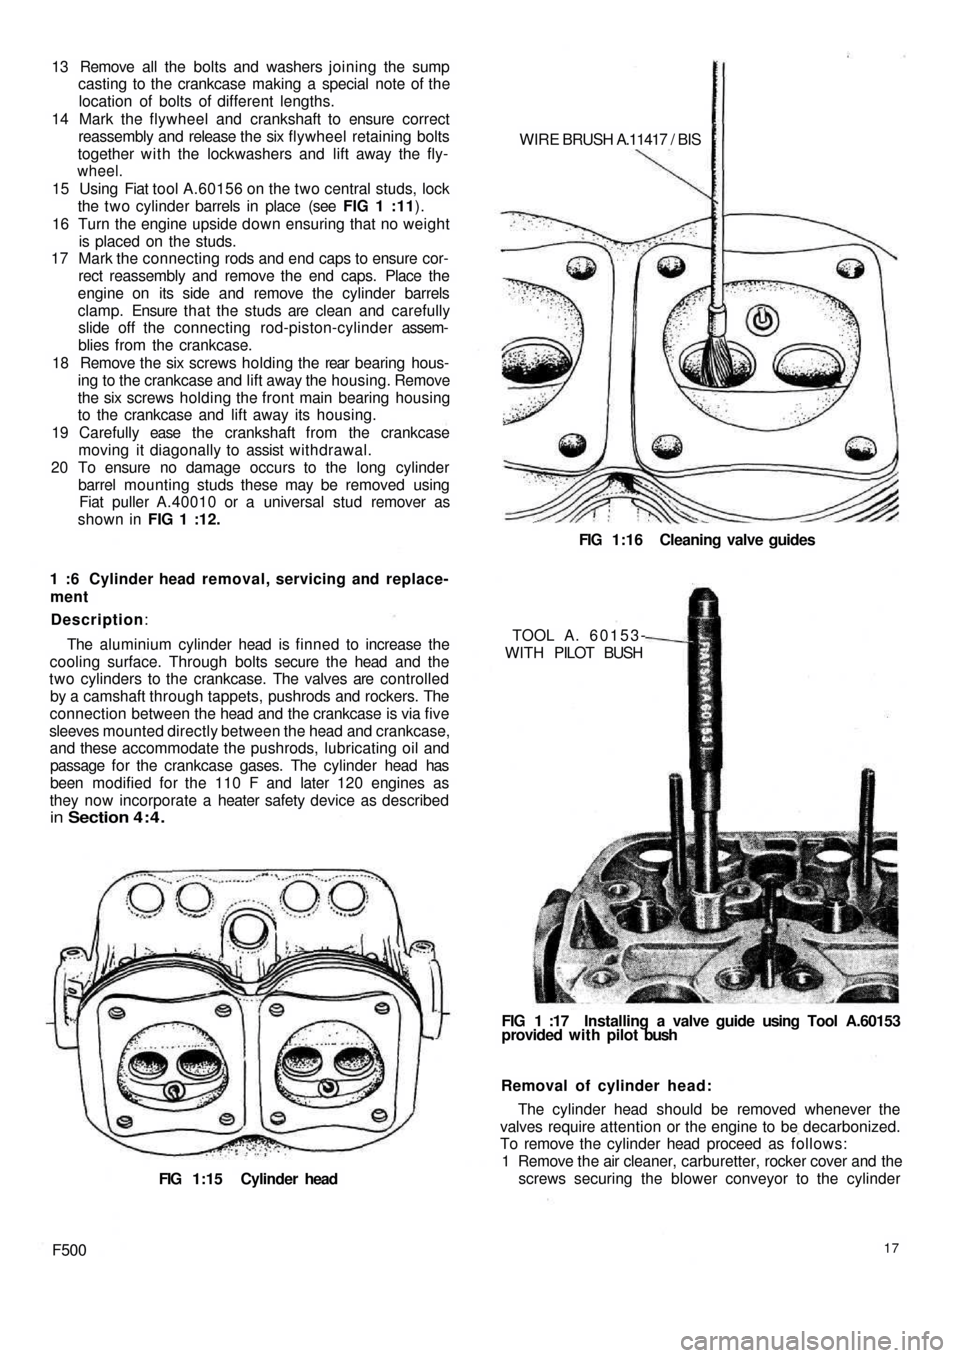 FIAT 500 1960 1.G Workshop Manual 13  Remove all the bolts and washers joining the sump
casting to the crankcase making a special note of the
location of bolts of different lengths.
14 Mark the flywheel and crankshaft to ensure correc